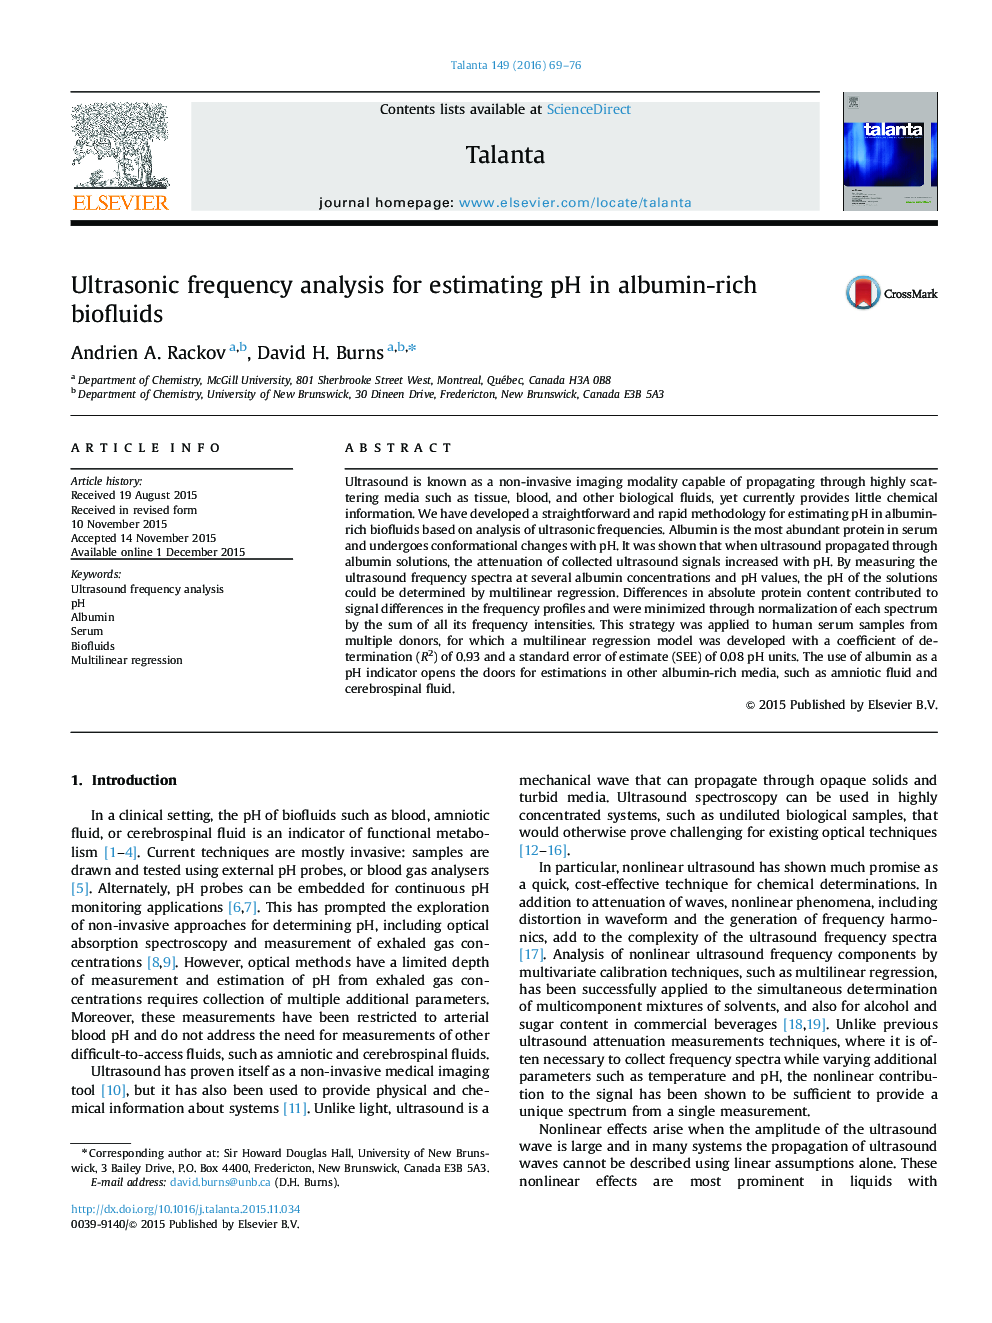 Ultrasonic frequency analysis for estimating pH in albumin-rich biofluids